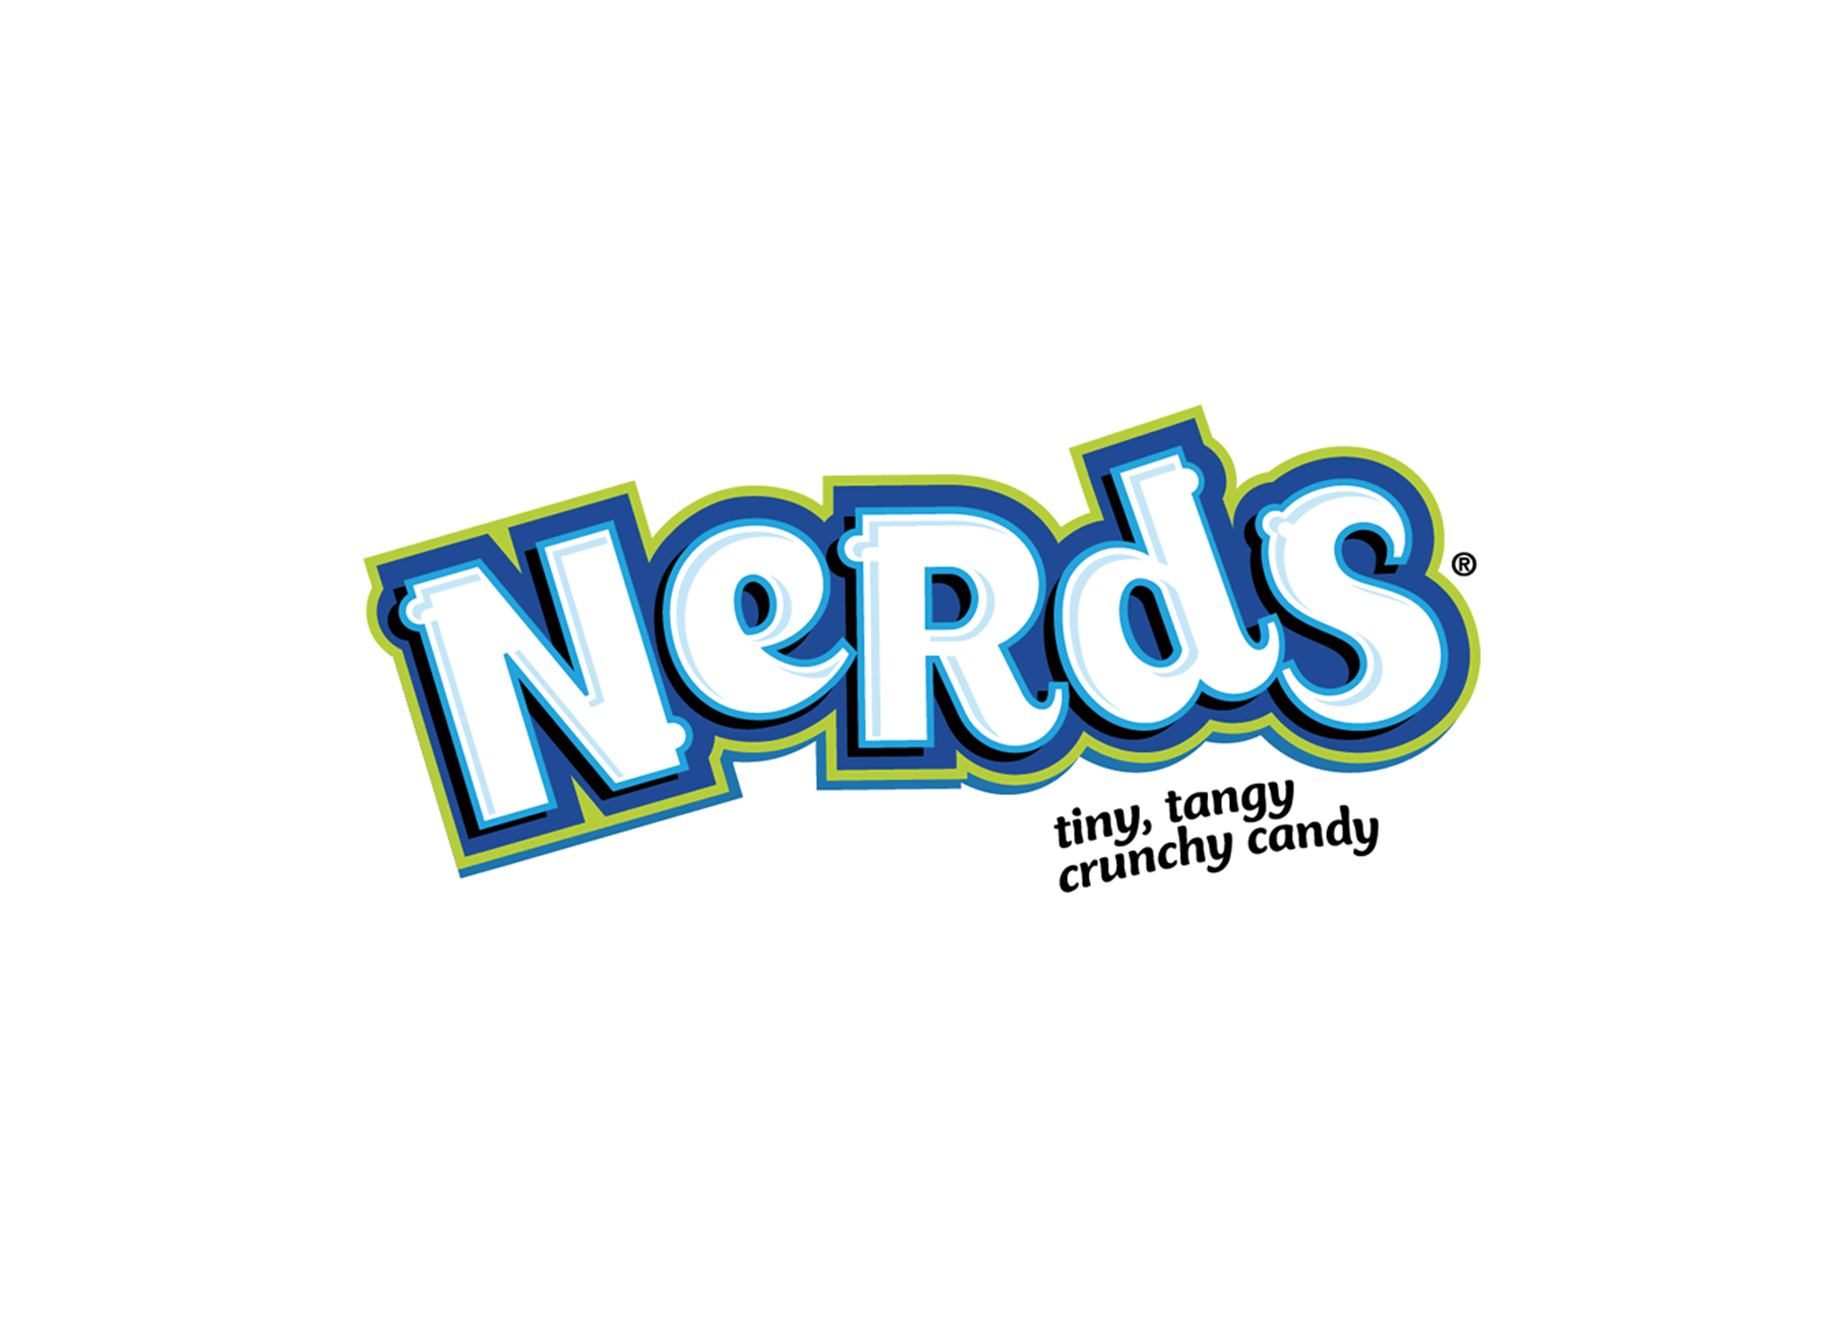 NERDS Appoints Golin to Develop Robust Public Relations Plan for 2020 -  Golin